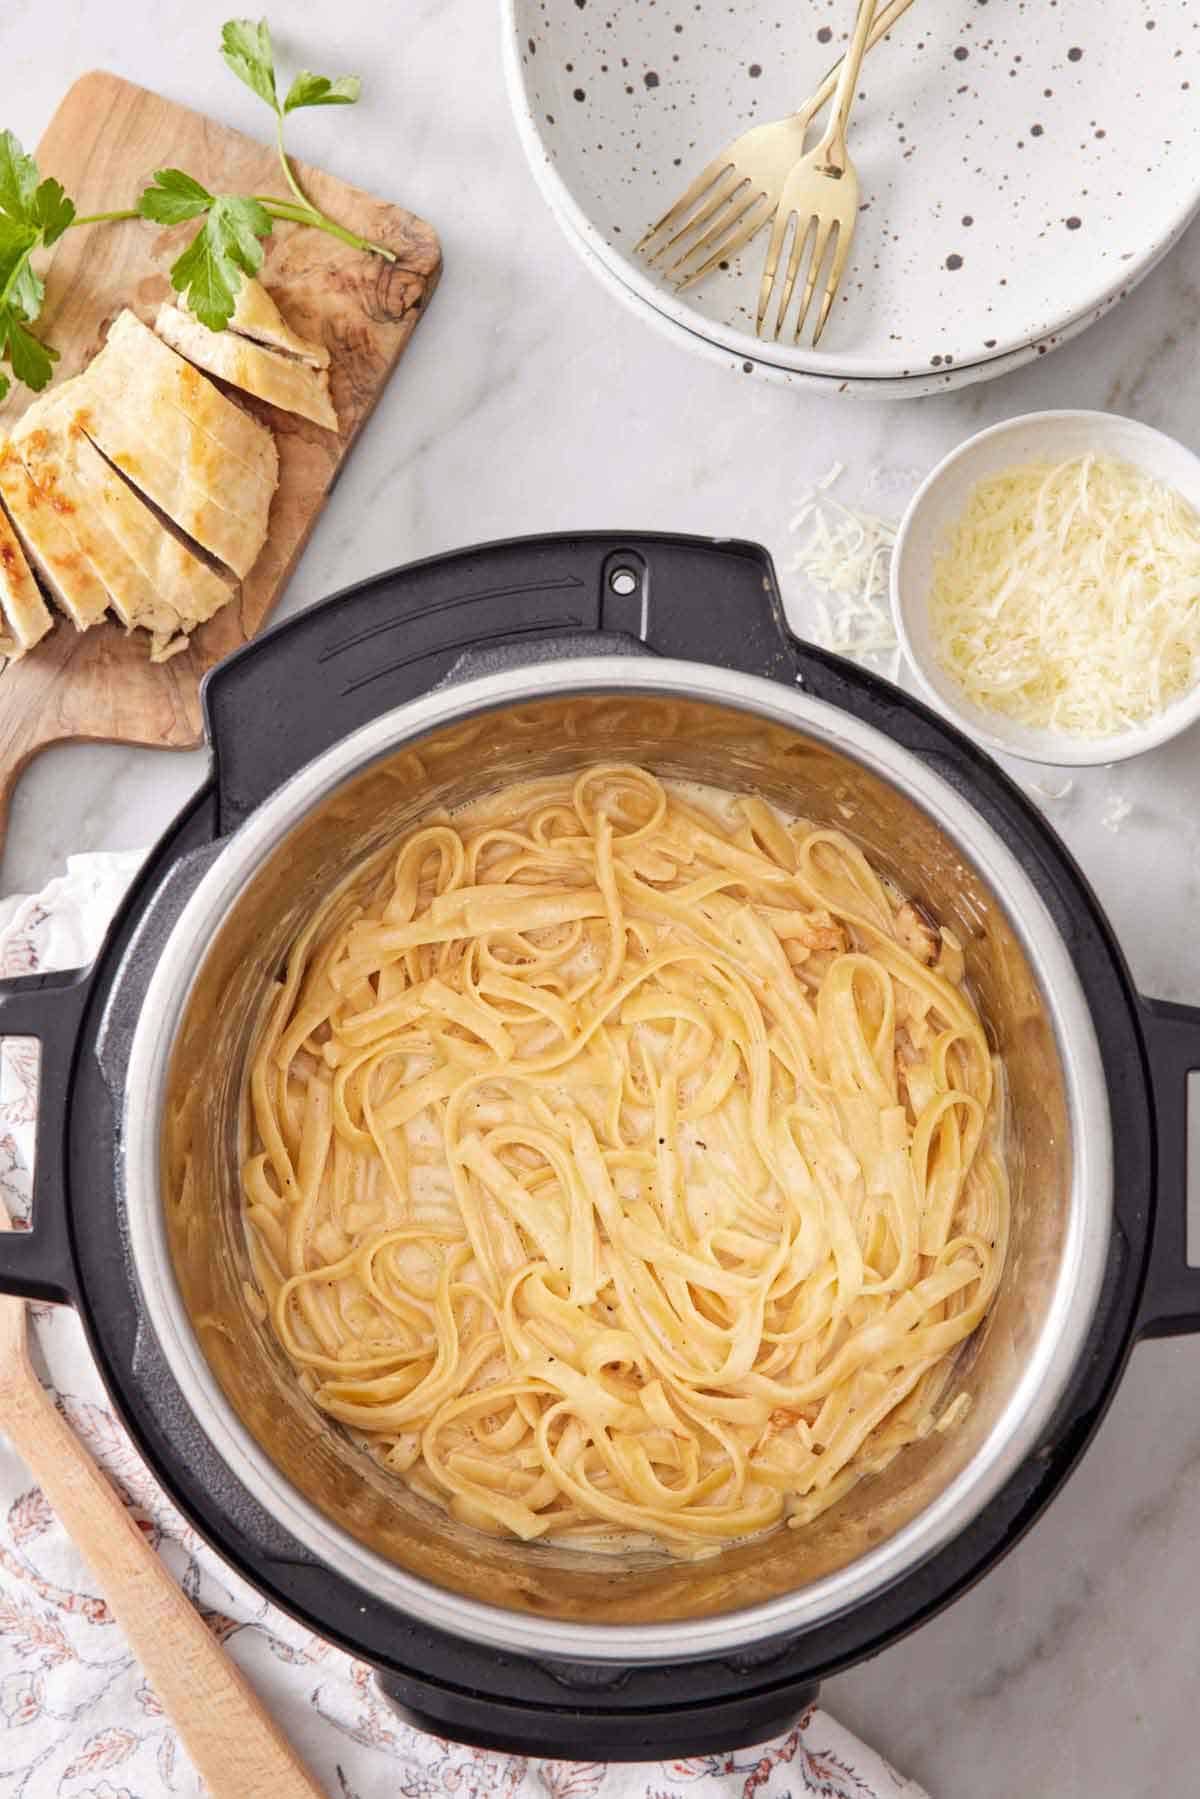 Overhead view of chicken alfredo in the Instant Pot. A stack of plates, forks, a bowl of cheese, and sliced bread with parsley on the side.